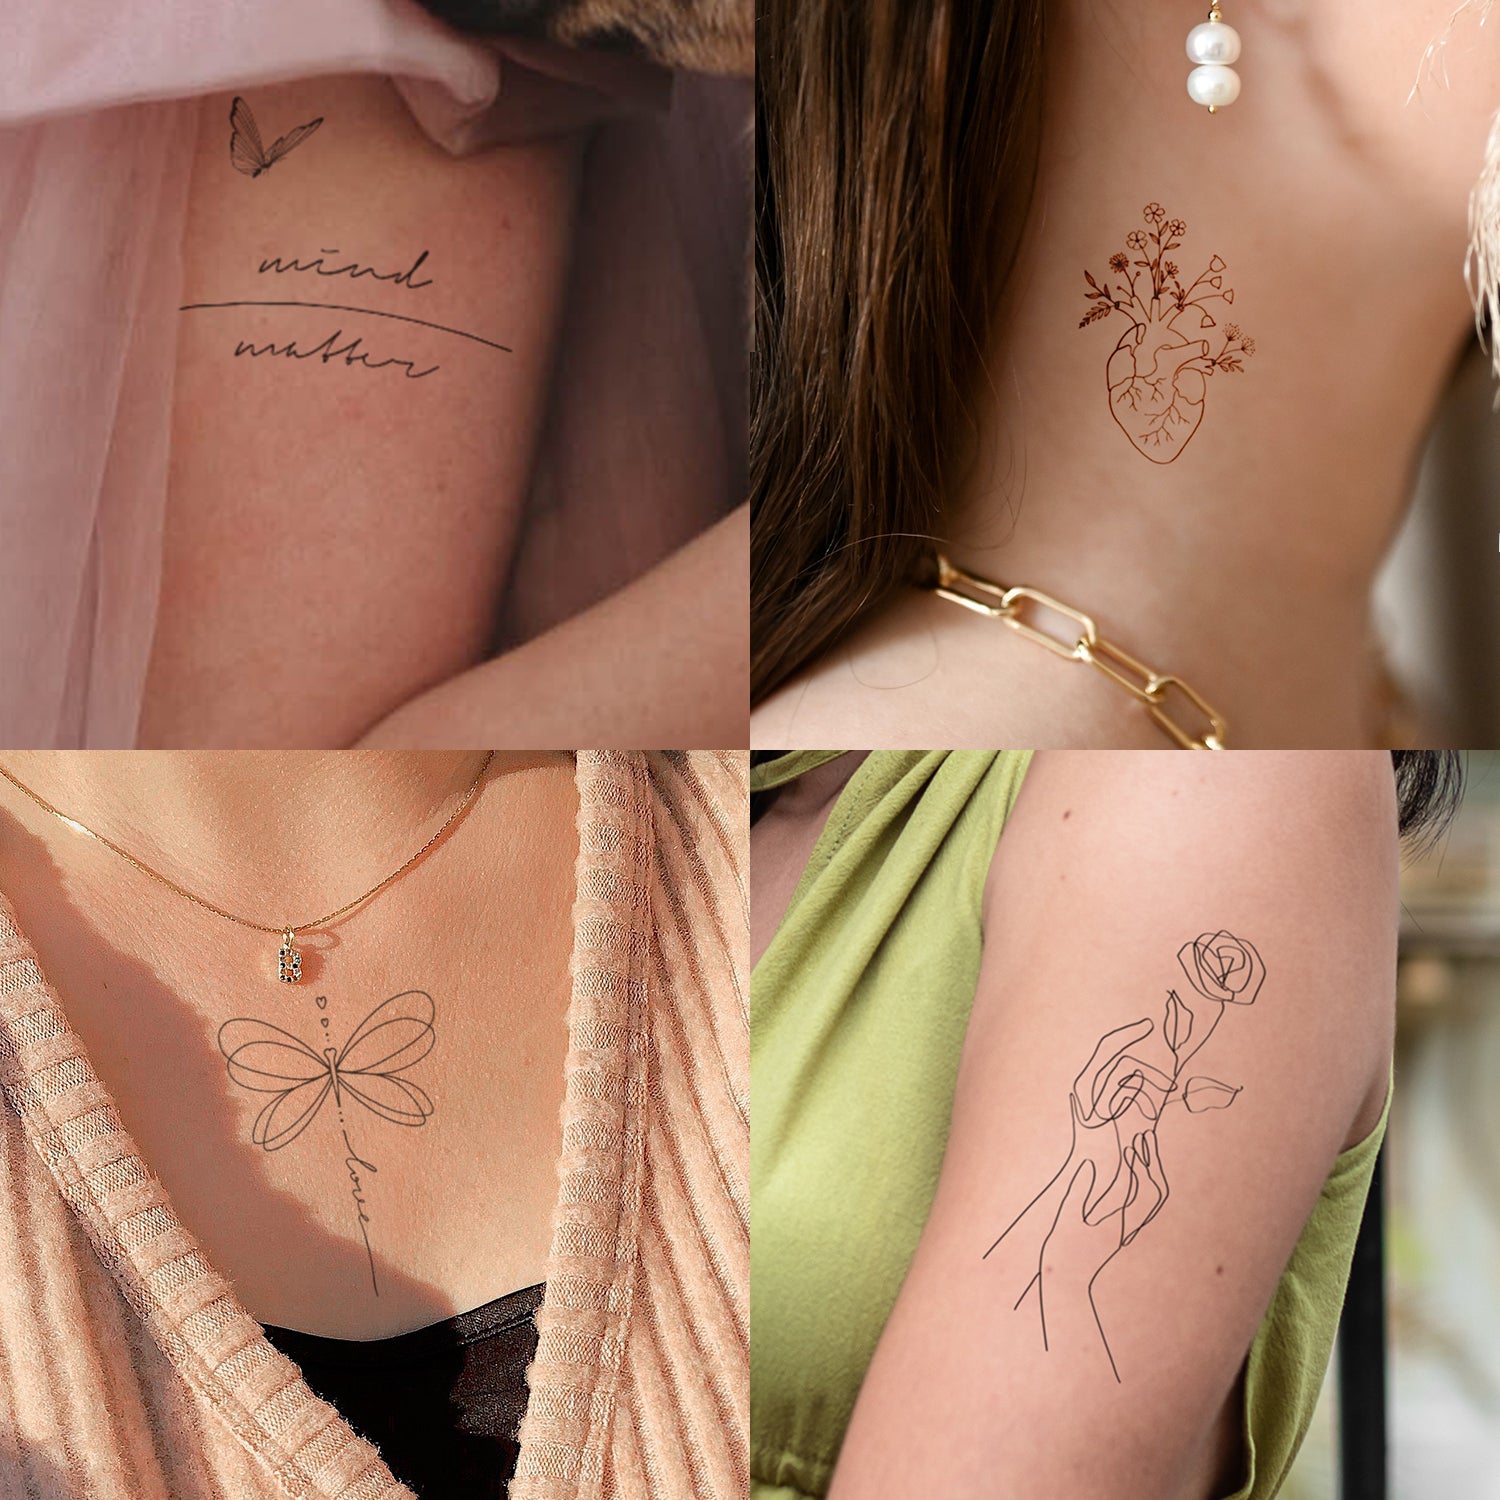 Tiny Tattoos for the Minimalist in You